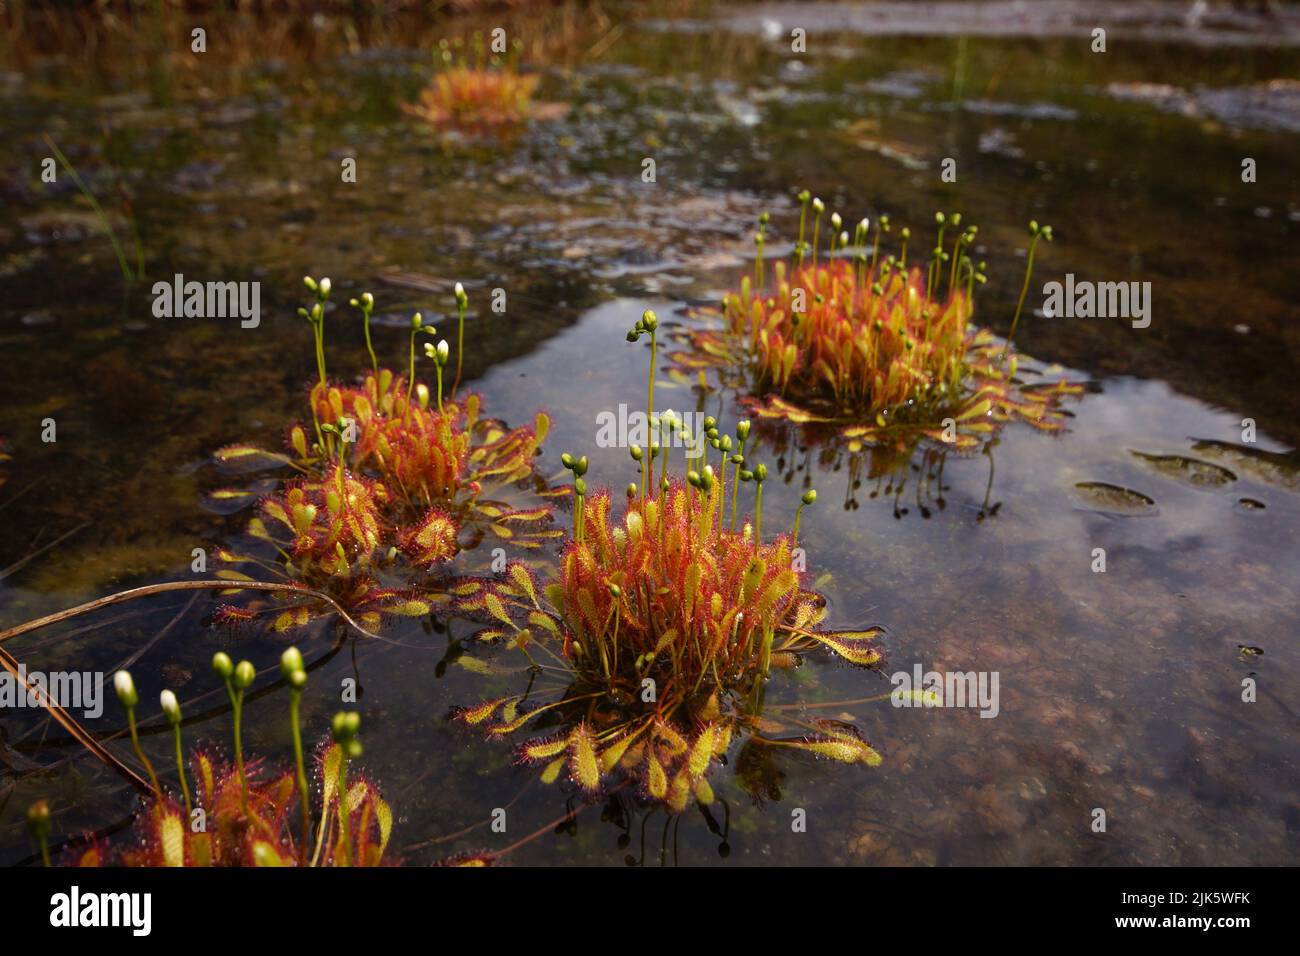 Circular clumps of English sundew (Drosera anglica) growing in a pond, Northern Norway Stock Photo